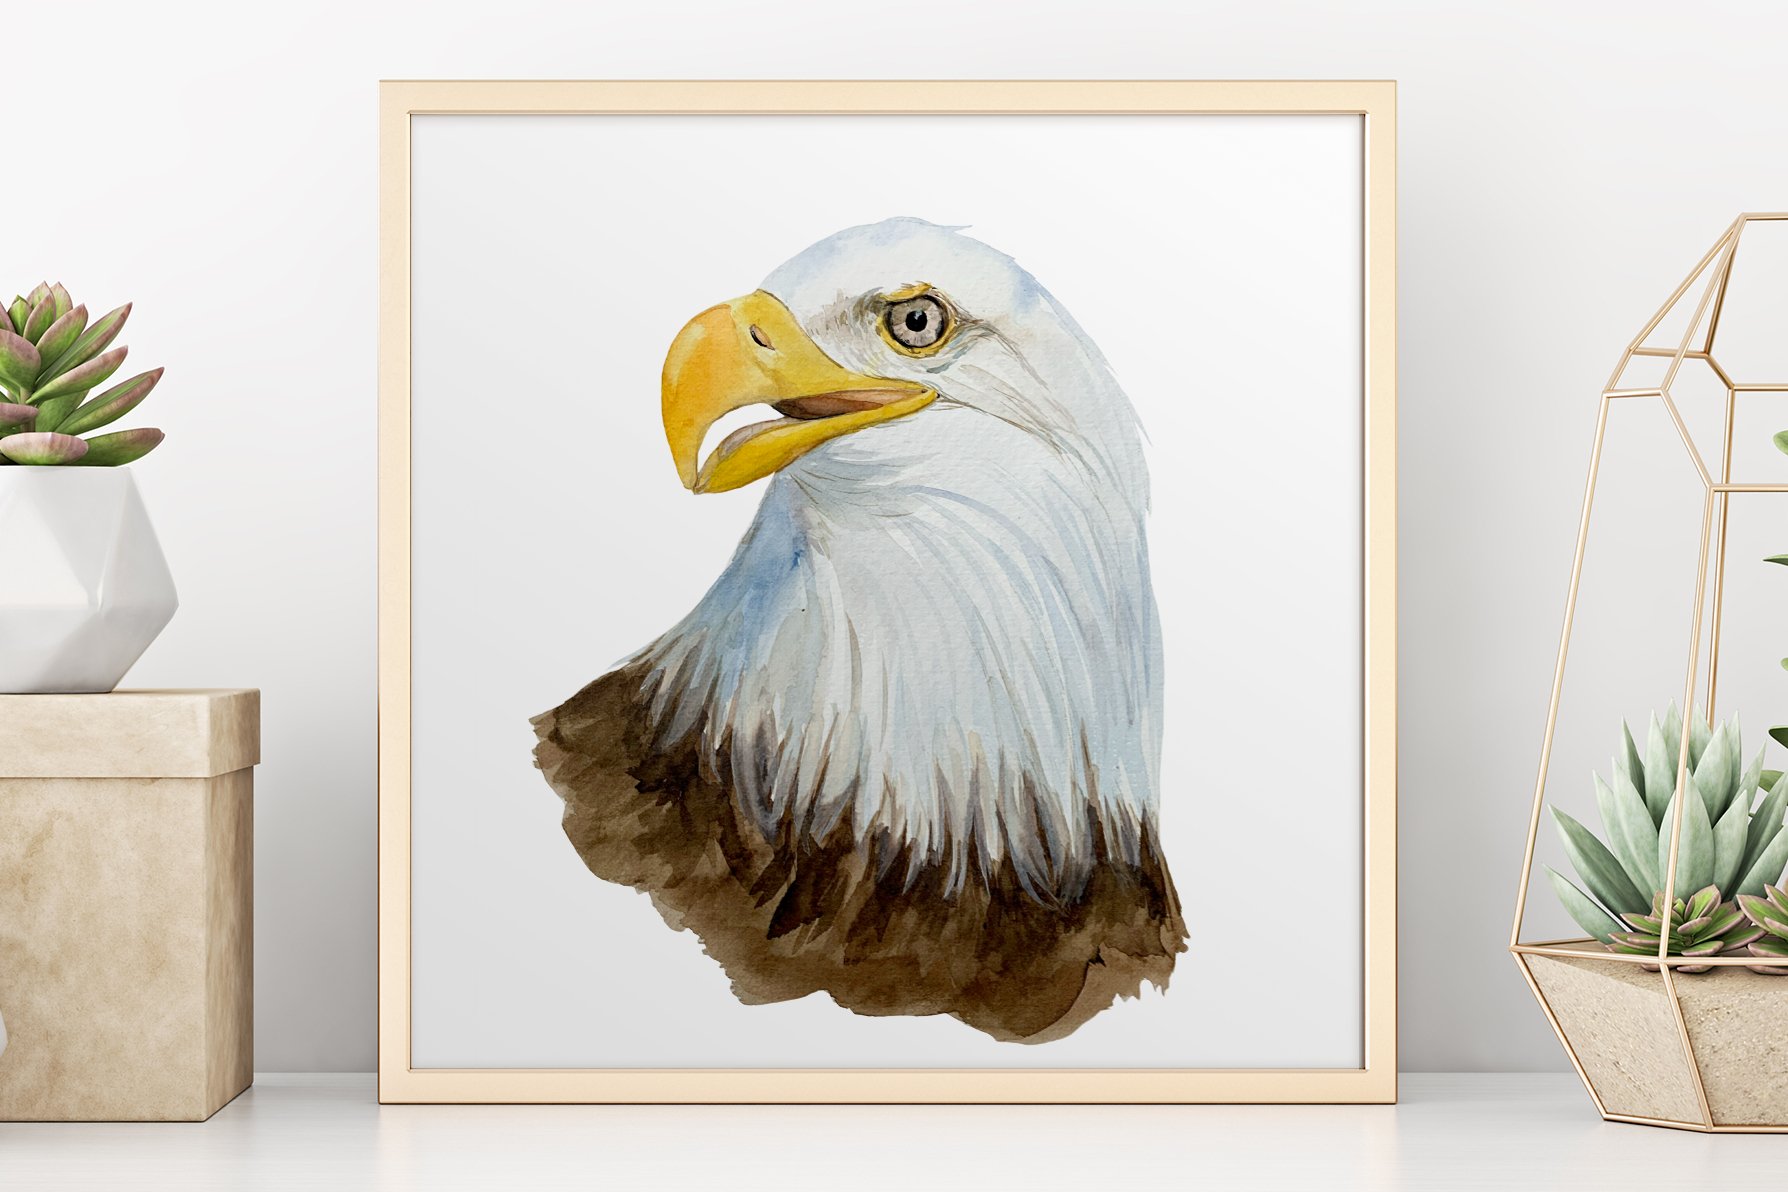 Picture of an eagle's head on a white background in a light style.